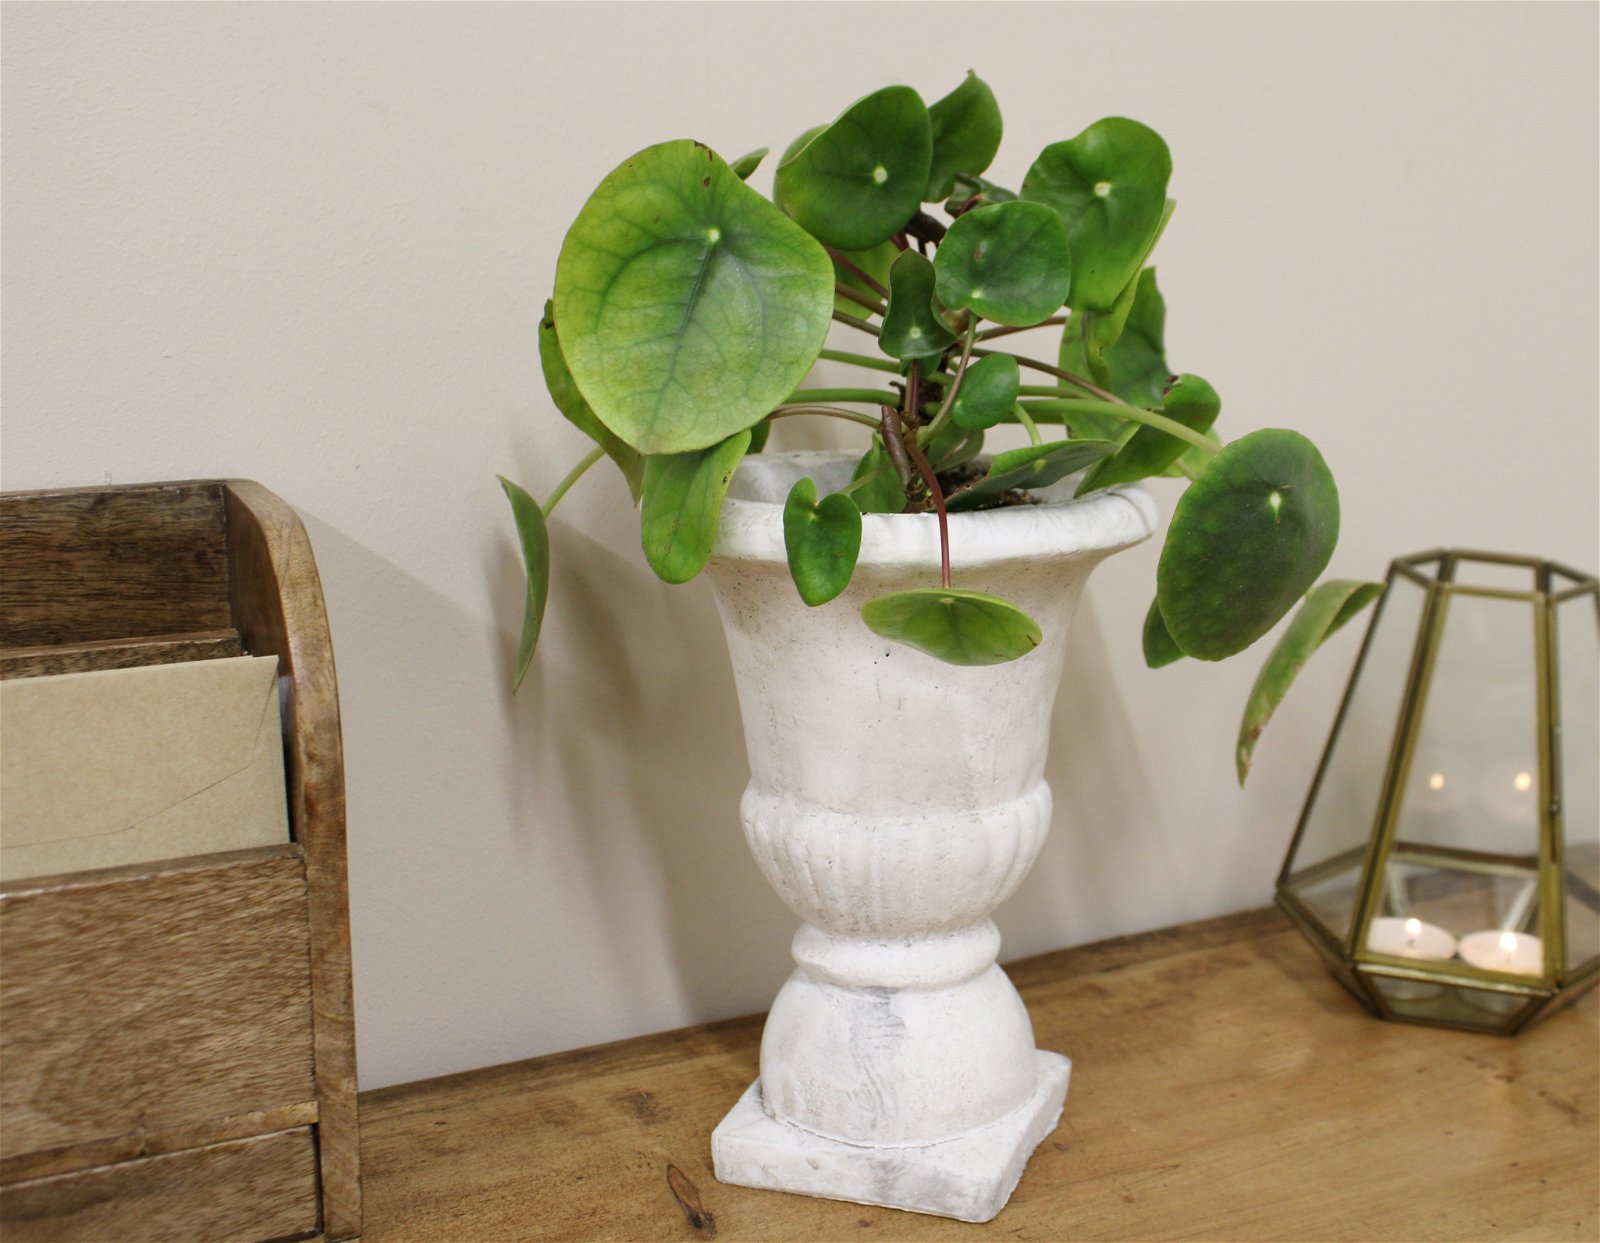 Classic Urn Planter - a Cheeky Plant